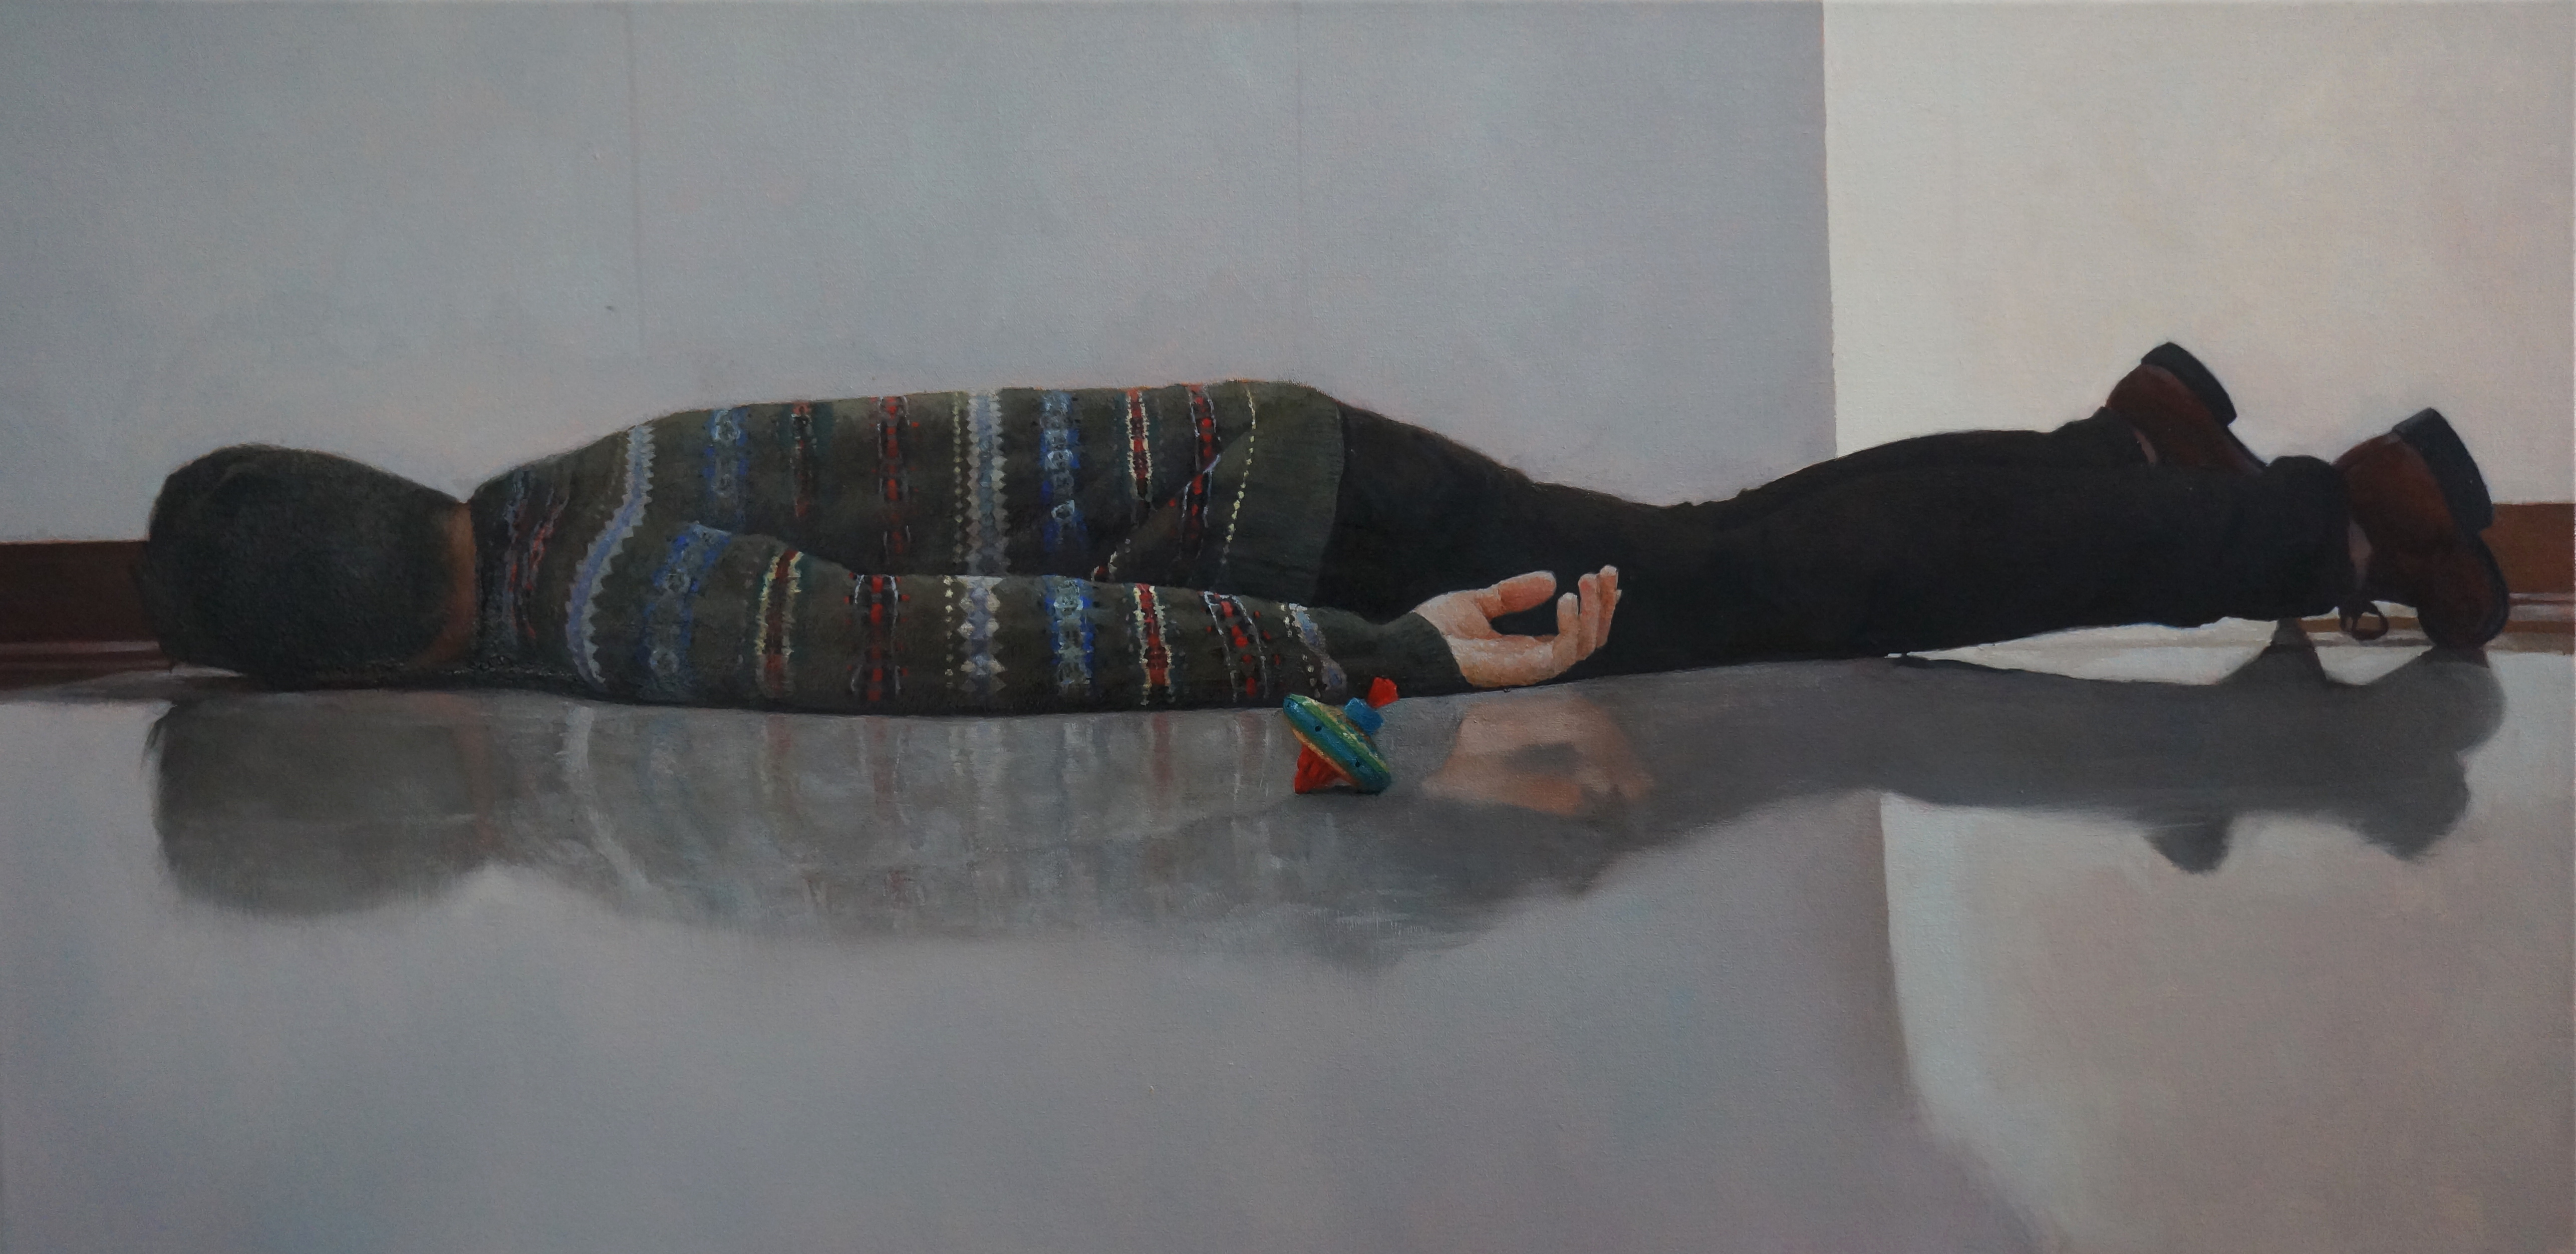 Oil on canvas, 2015, 24 x 48 in.